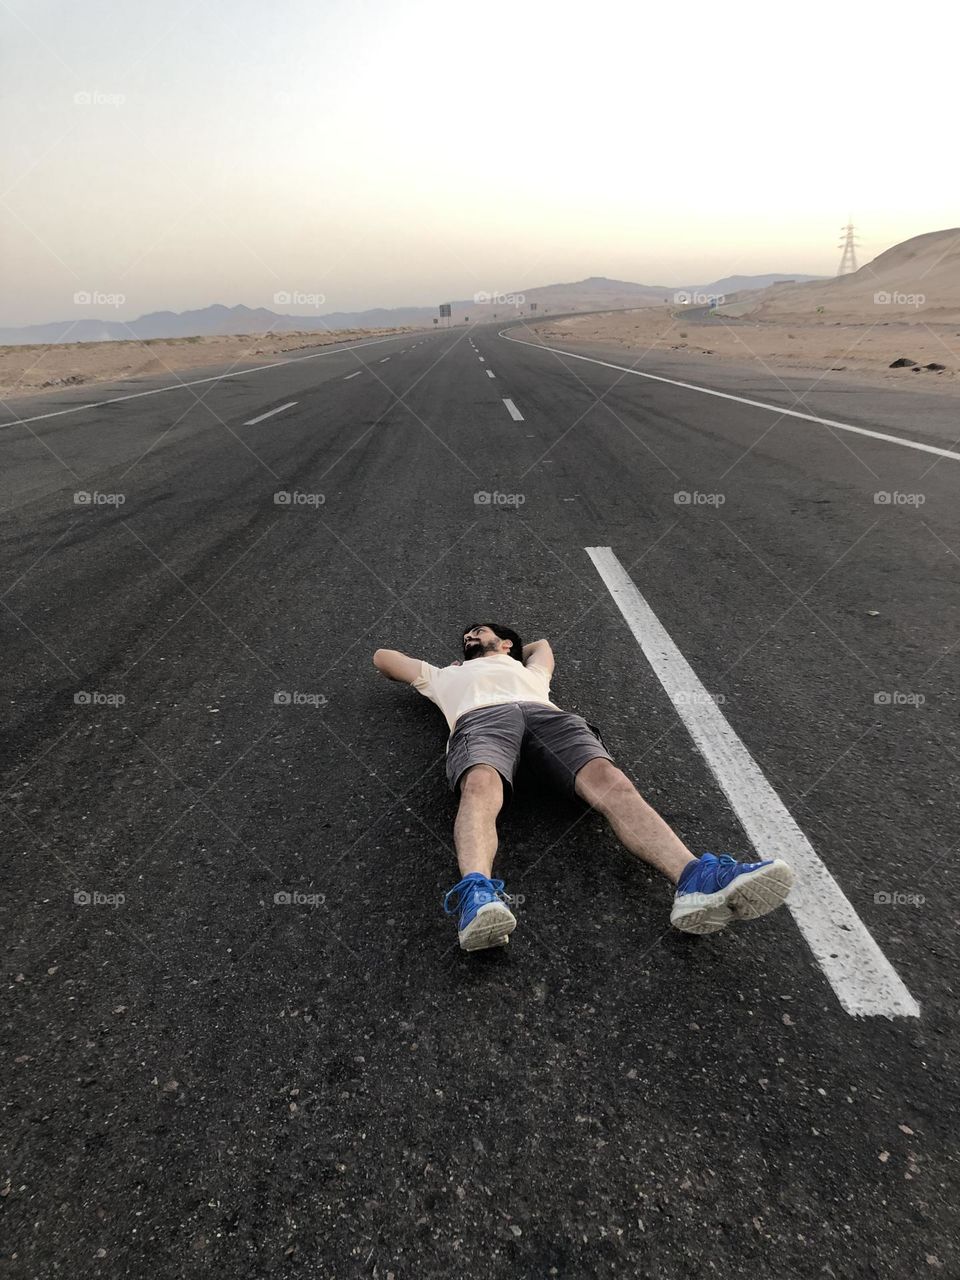 Fell on the road